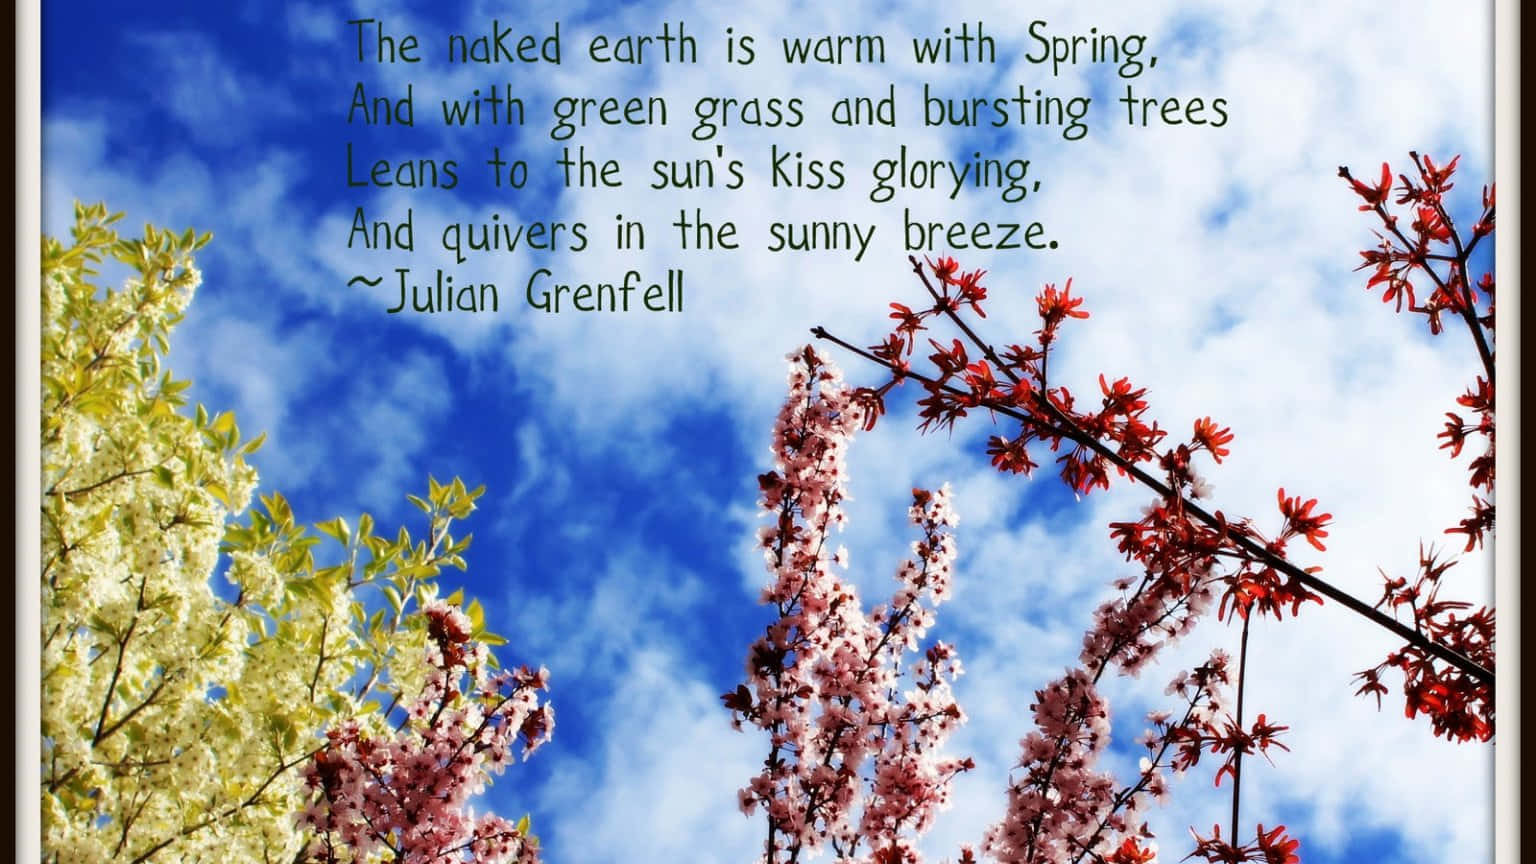 Blossoming Tree with Inspiring Spring Quote Wallpaper